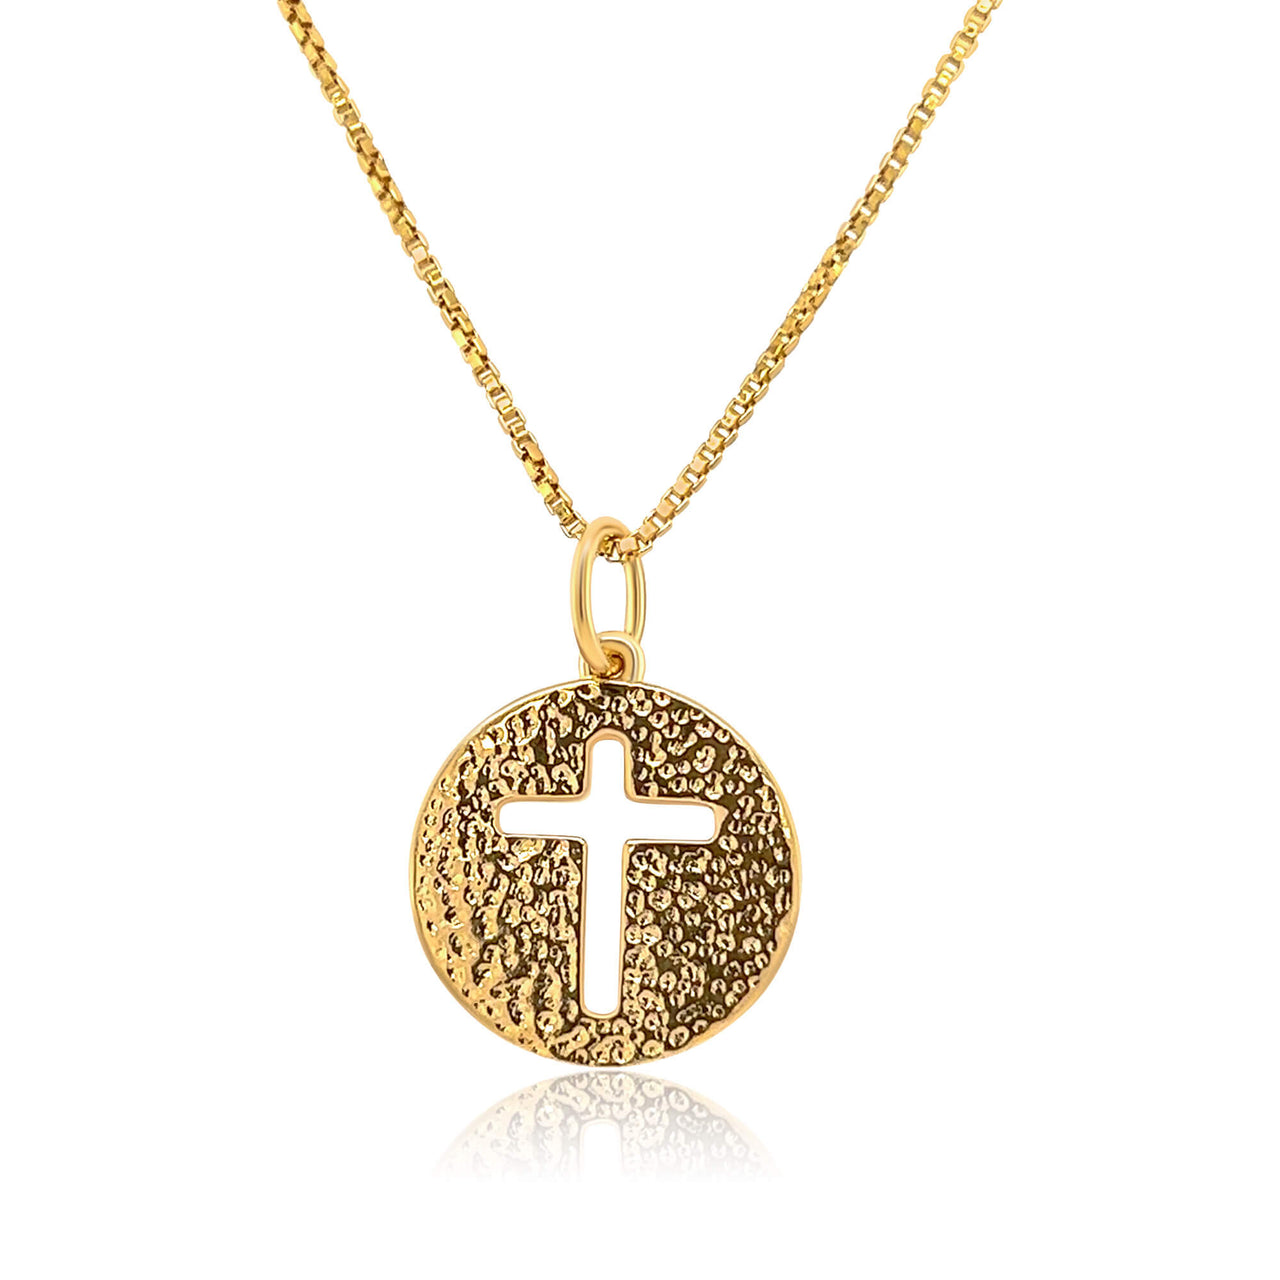 Cross Medallion Necklace Gold Filled Jewelry